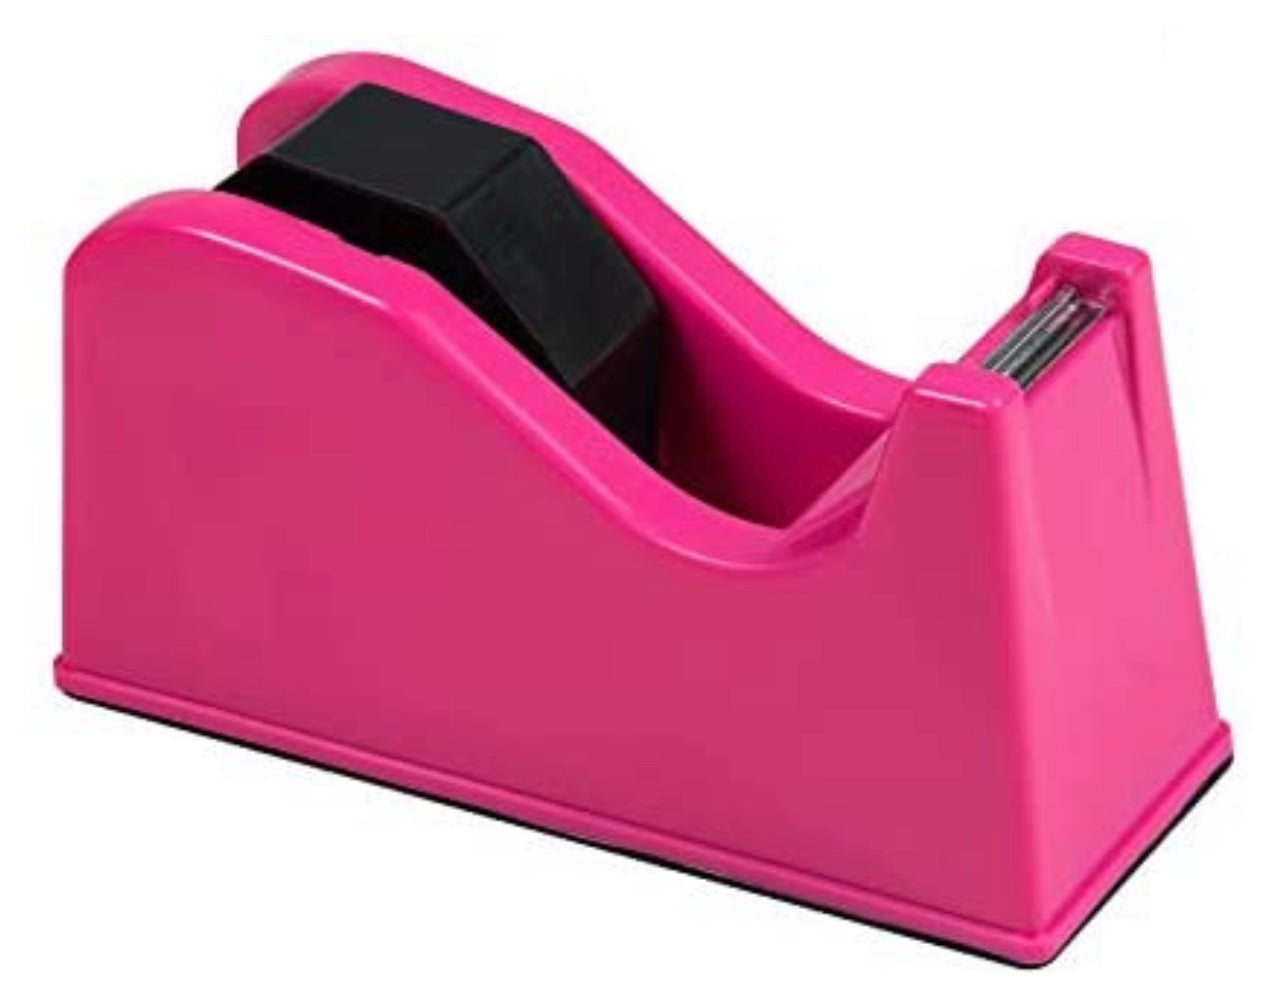 Sublimation Heat Tape Dispenser 6.3 x 2.5 x 3.4 Inch, Holder Fits 1 a – We  Sub'N